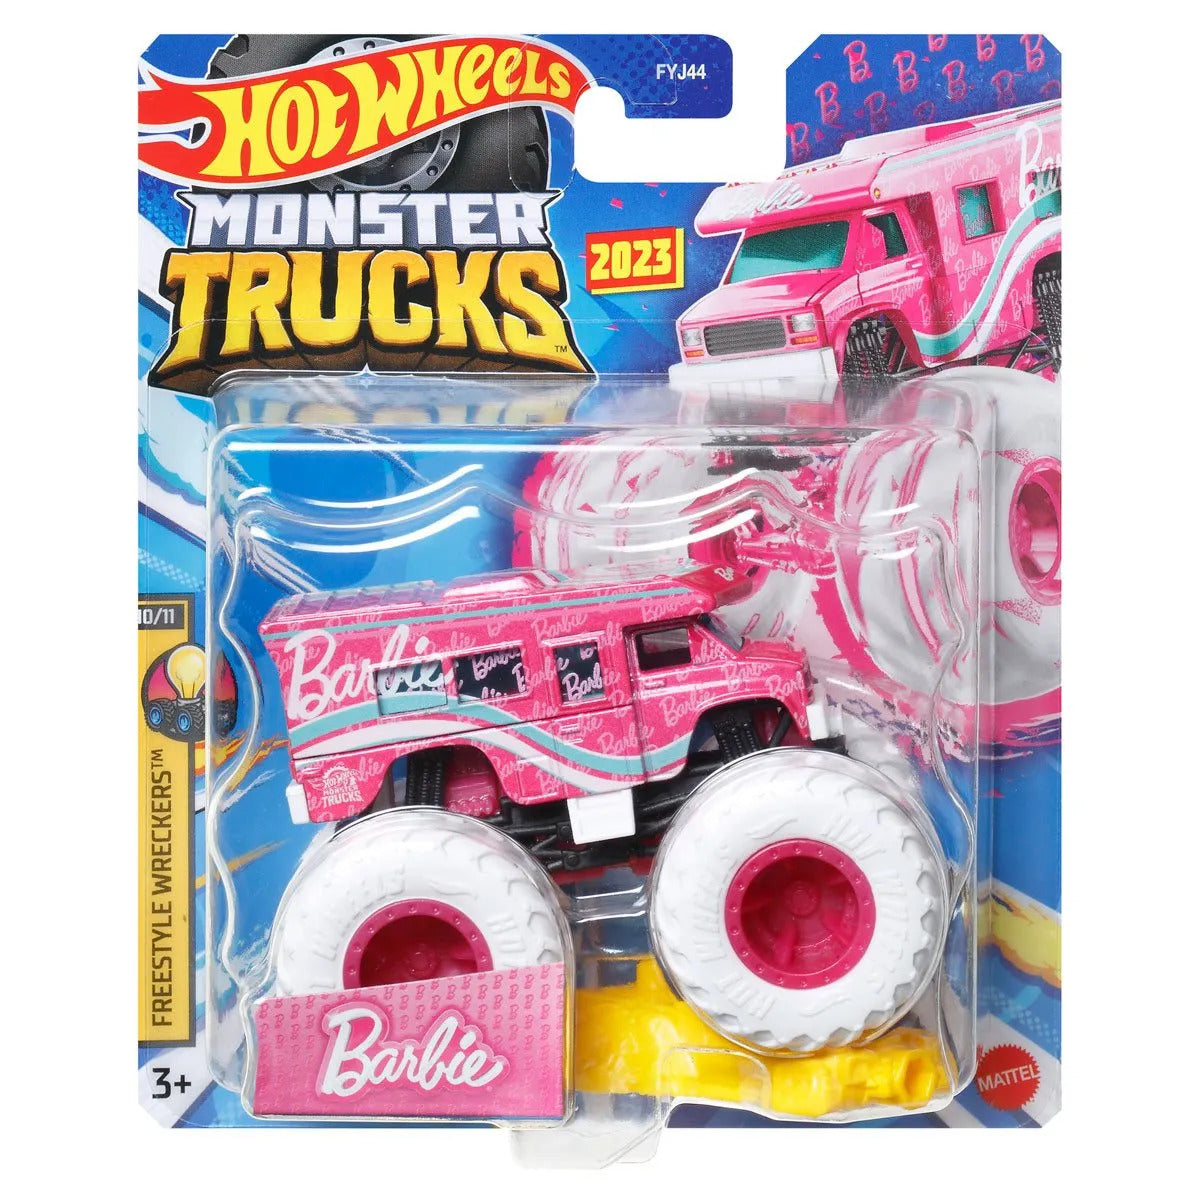 Hot Wheels Monster Trucks Selection Of 1:64 Scale Collectible